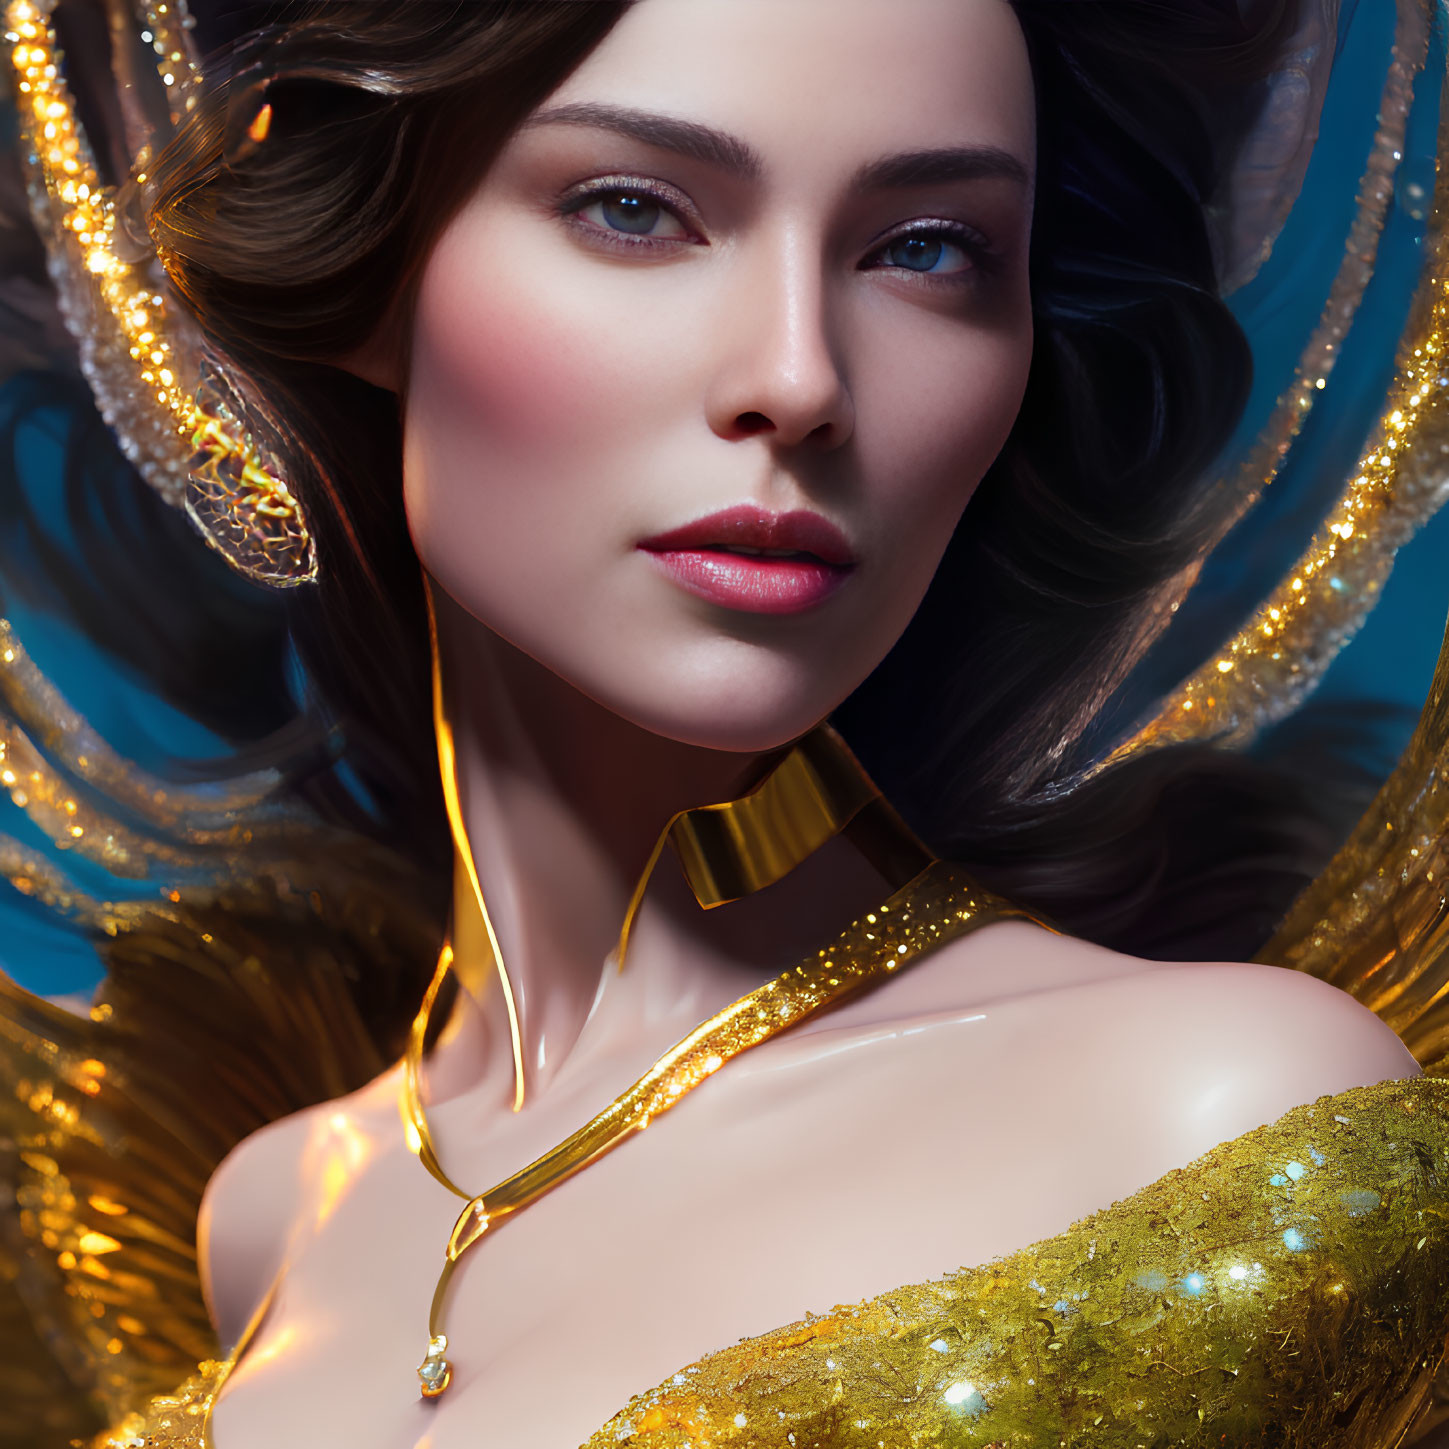 Digital artwork: Woman adorned with golden jewelry, surrounded by shimmering feather-like elements on blue background